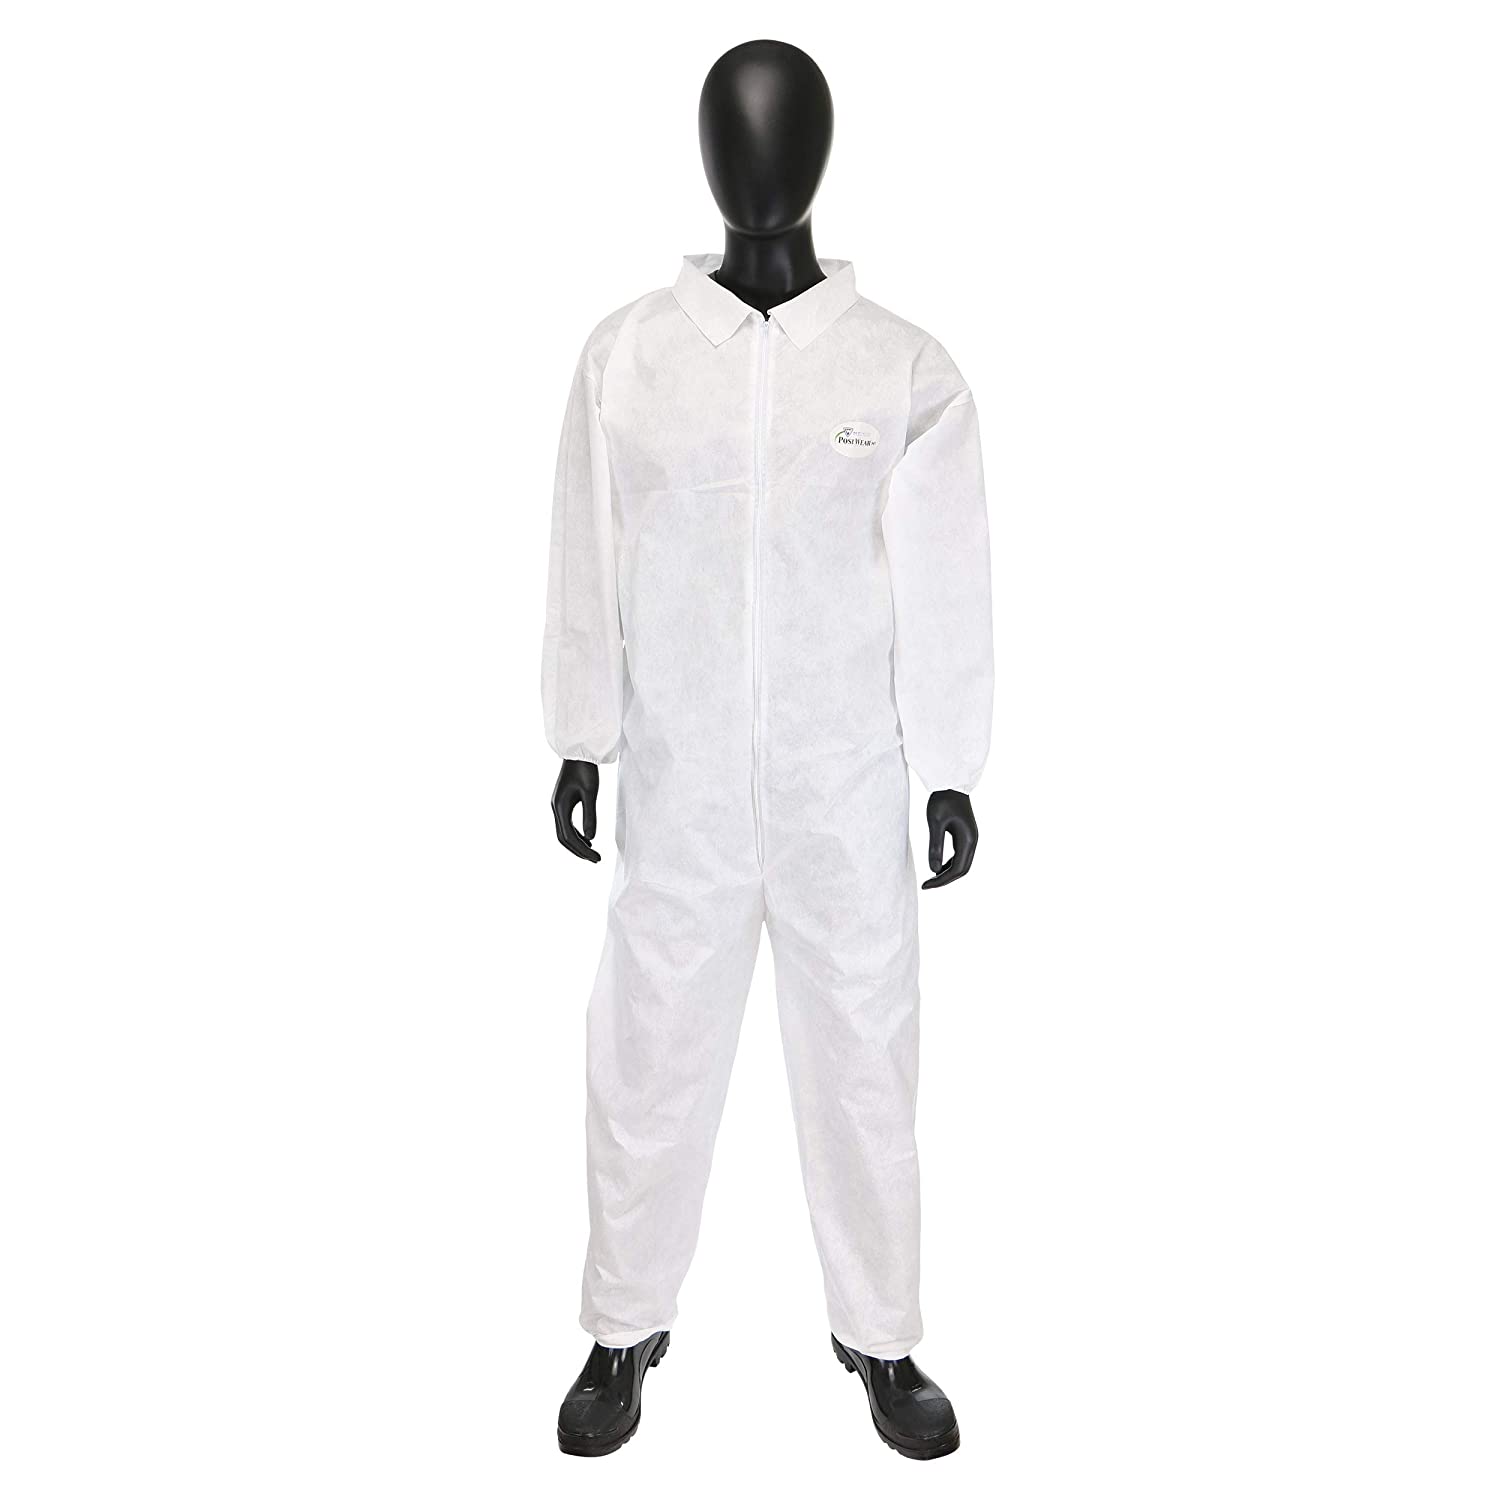 Posiwear 3XL M3 Disposable White Coveralls with Elastic Wrists and Ankles (Case)